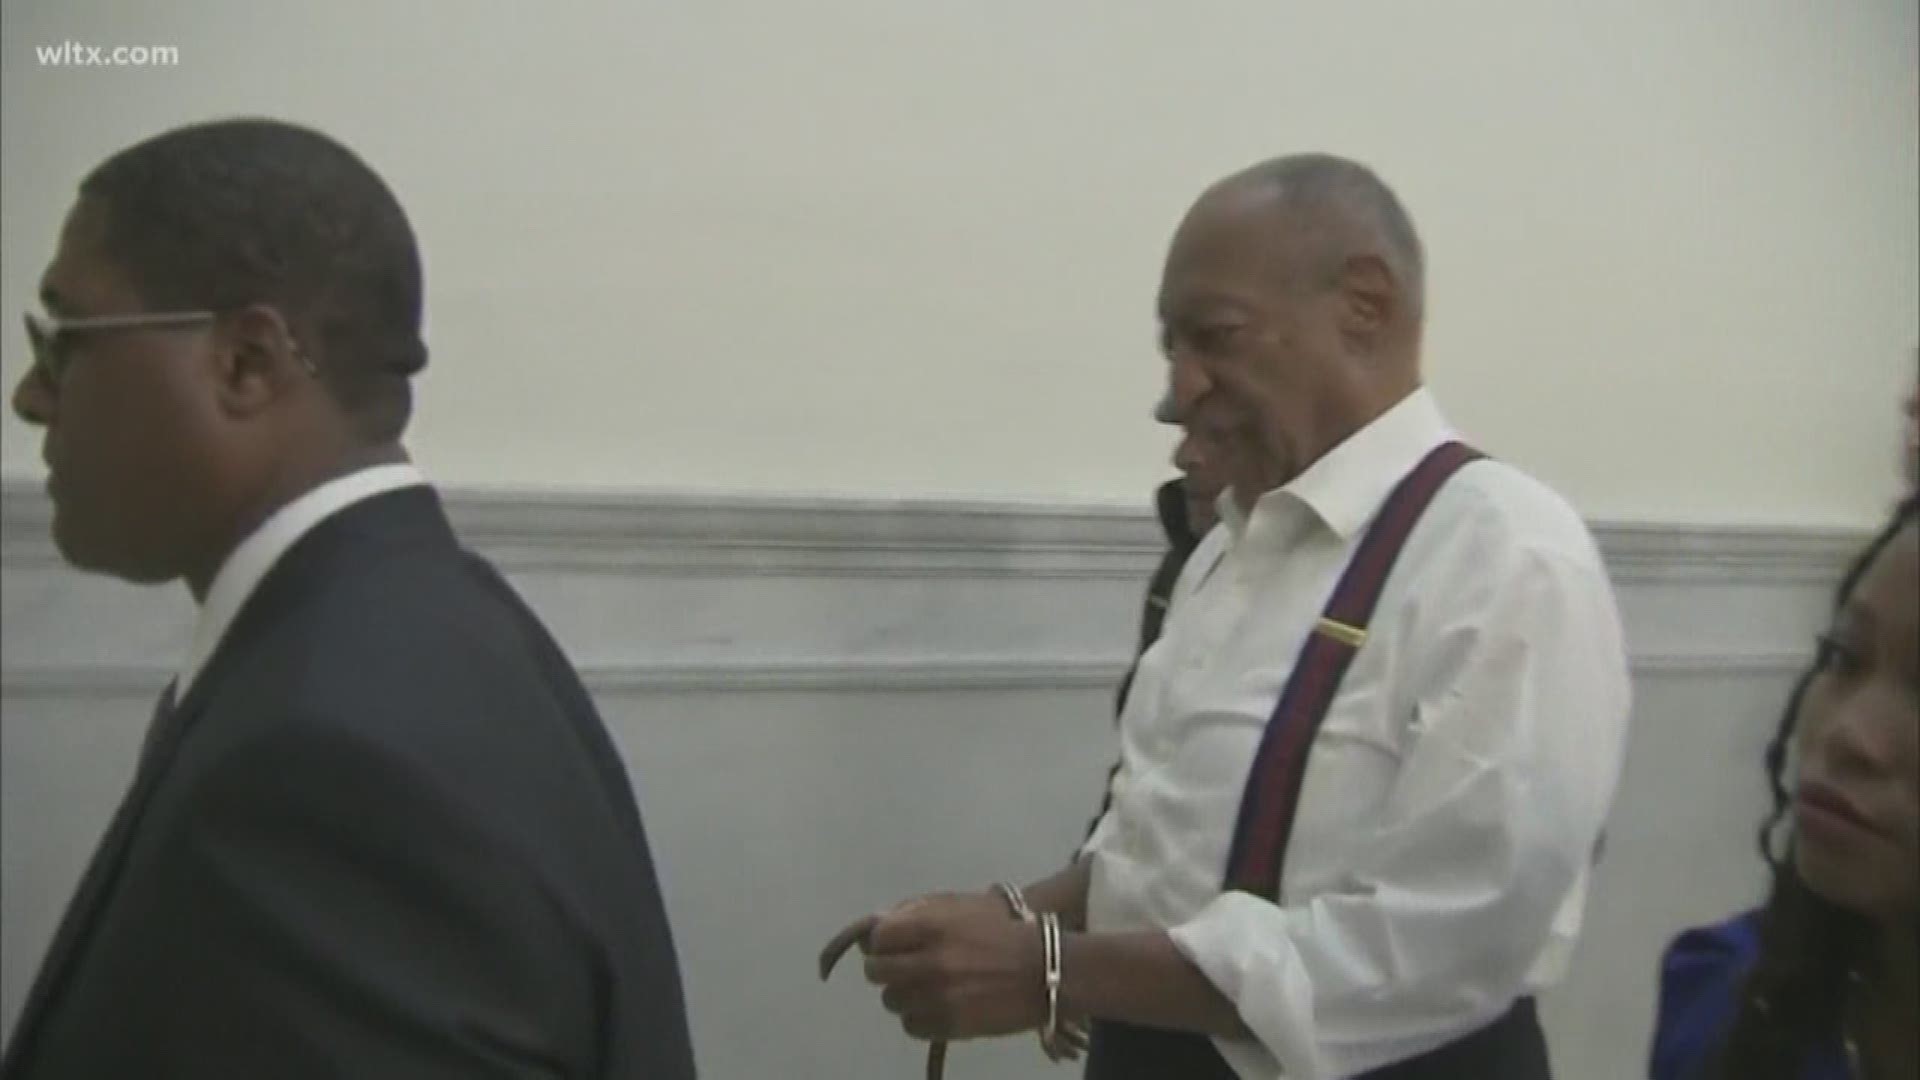 This is the moment that disgraced star Bill Cosby was brought out of court in handcuffs after being sentenced to prison on September 25, 208.